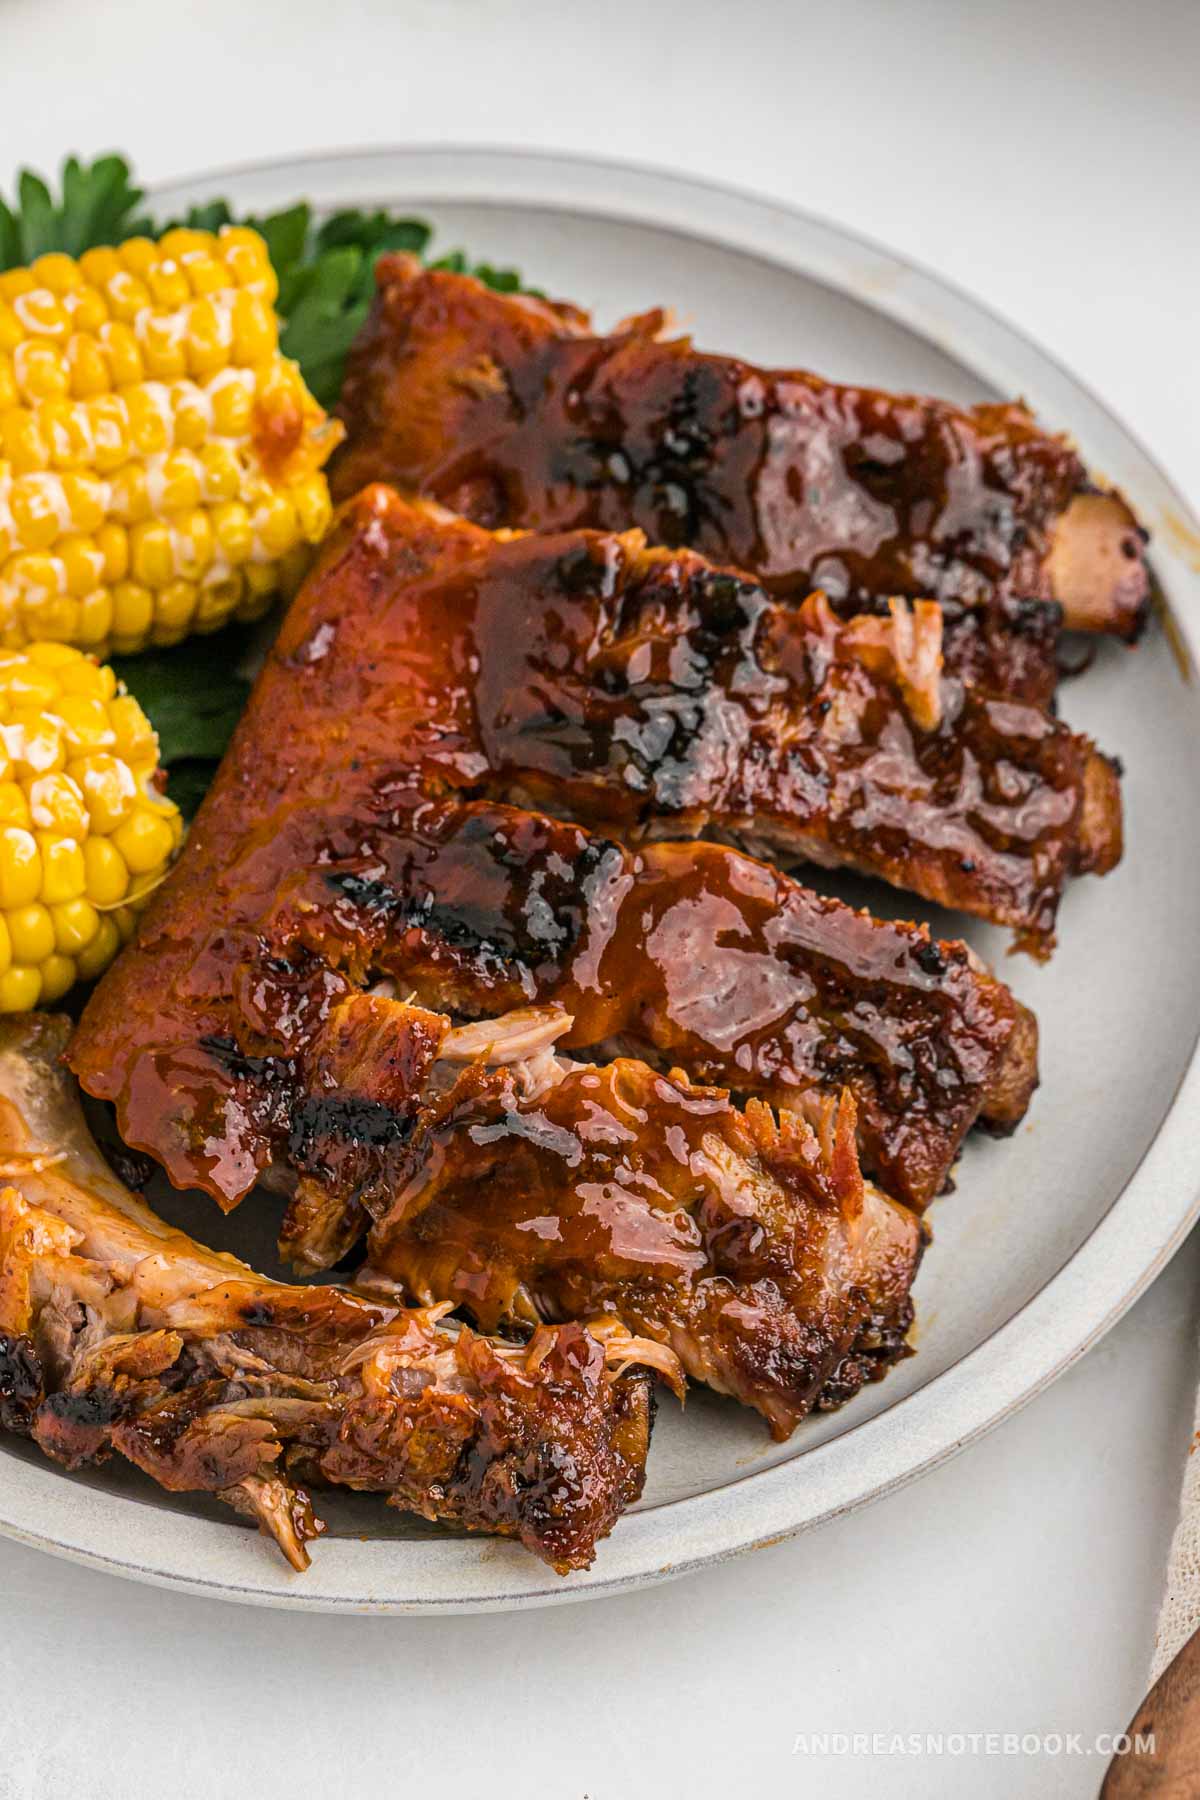 Plate full of oven baked baby back ribs with a dry rub and bbq sauce on a plate.